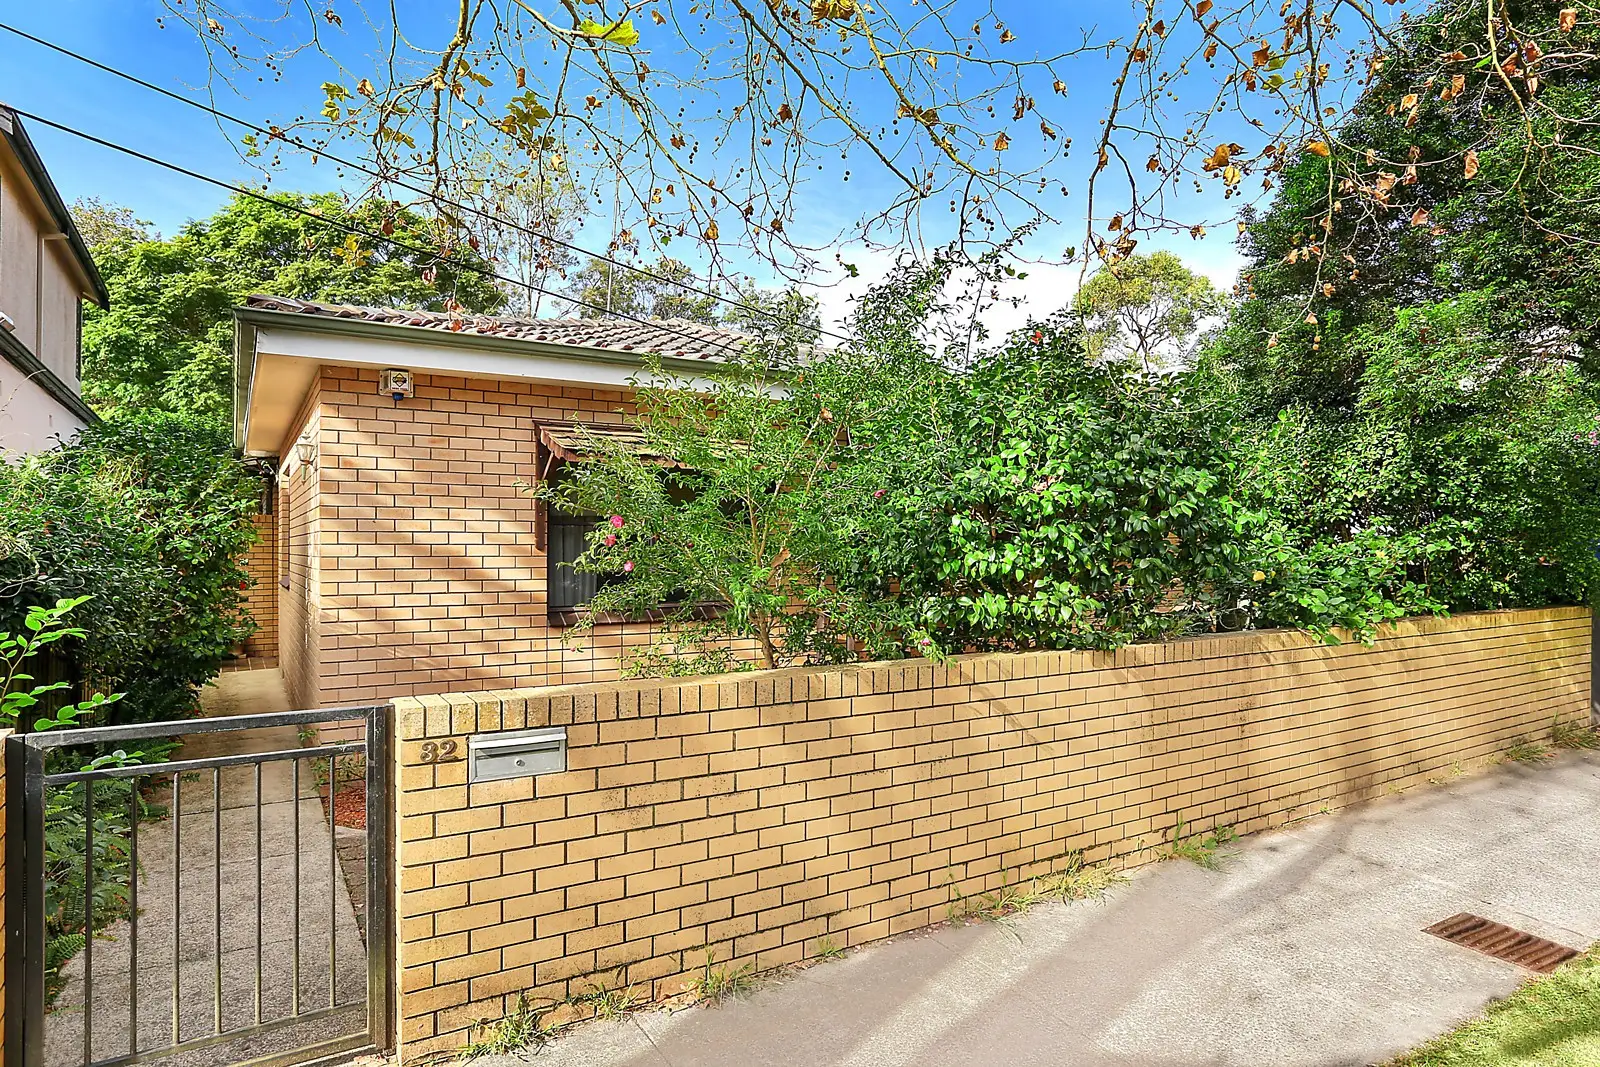 Photo #2: 32 Epping Road, Double Bay - Sold by Sydney Sotheby's International Realty